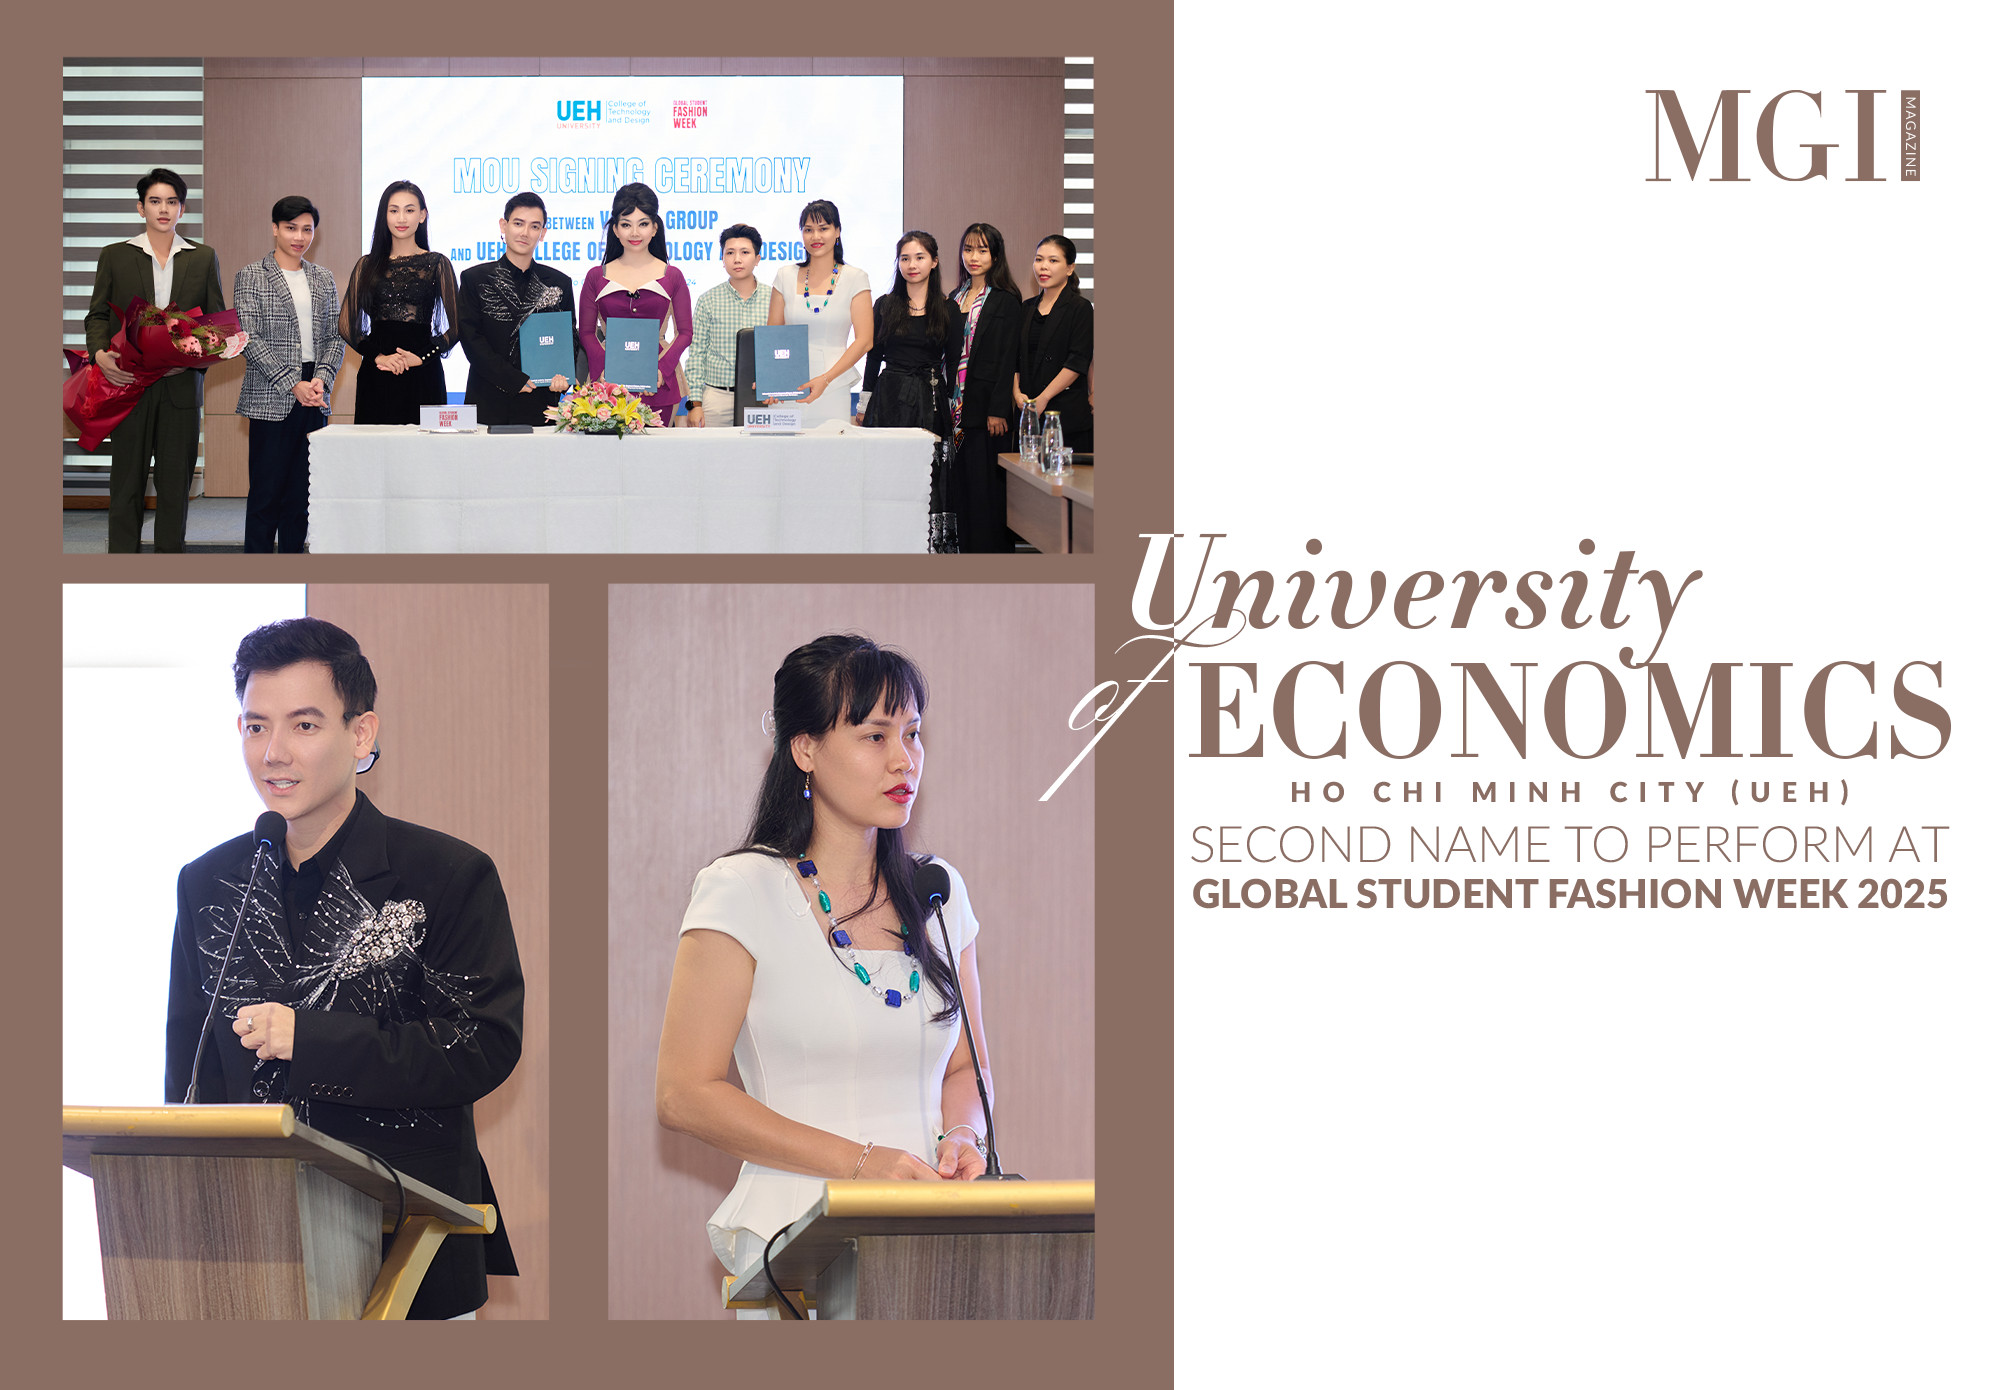 University of Economics Ho Chi Minh City (UEH) - second name to perform at Global Student Fashion Week 2025